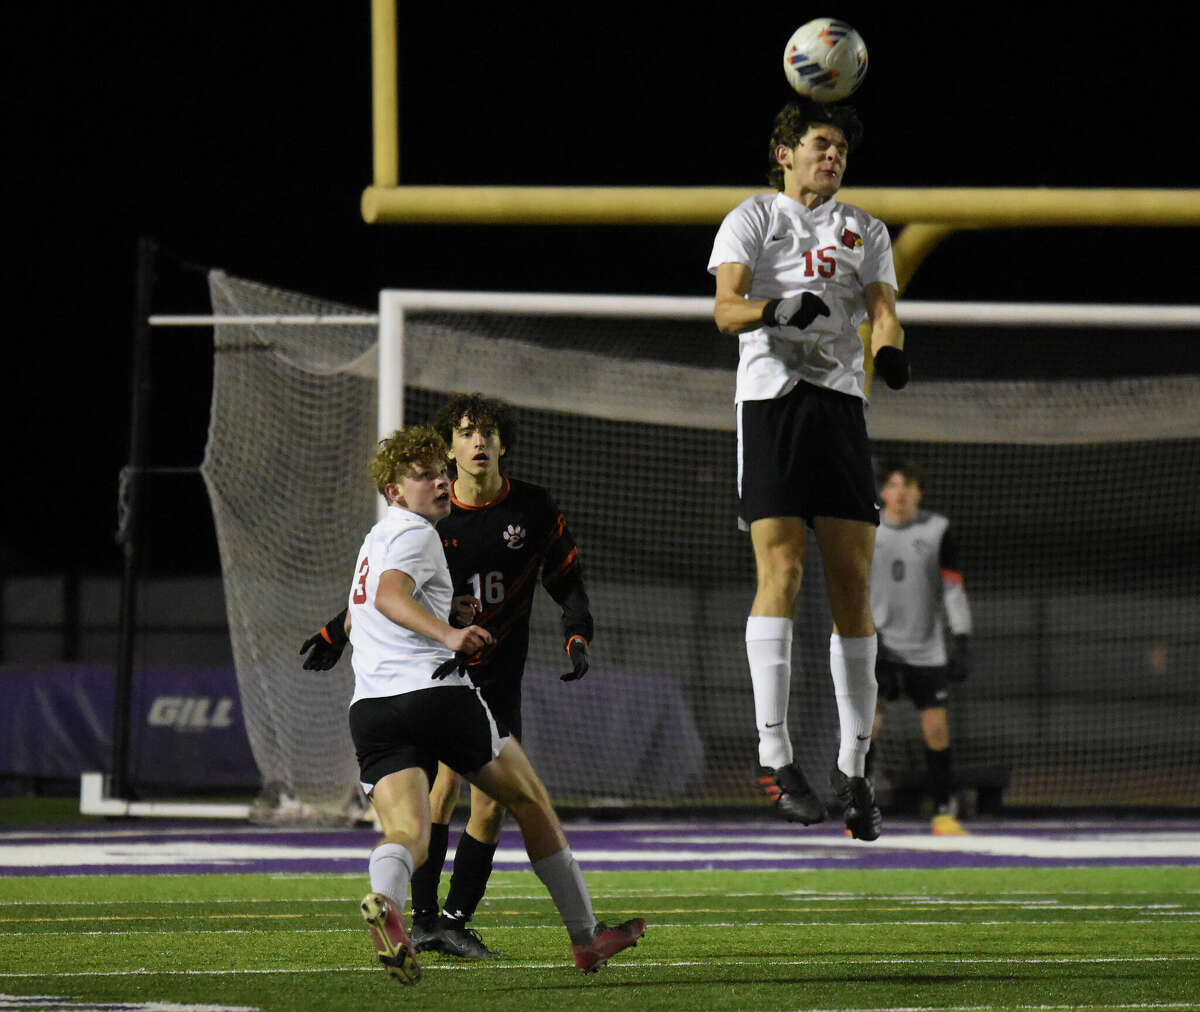 Alton's Ashton Schepers goes high for a ball during the Class 3A Collinsville Regional semifinals on Wednesday at Kahok Stadium in Collinsville.